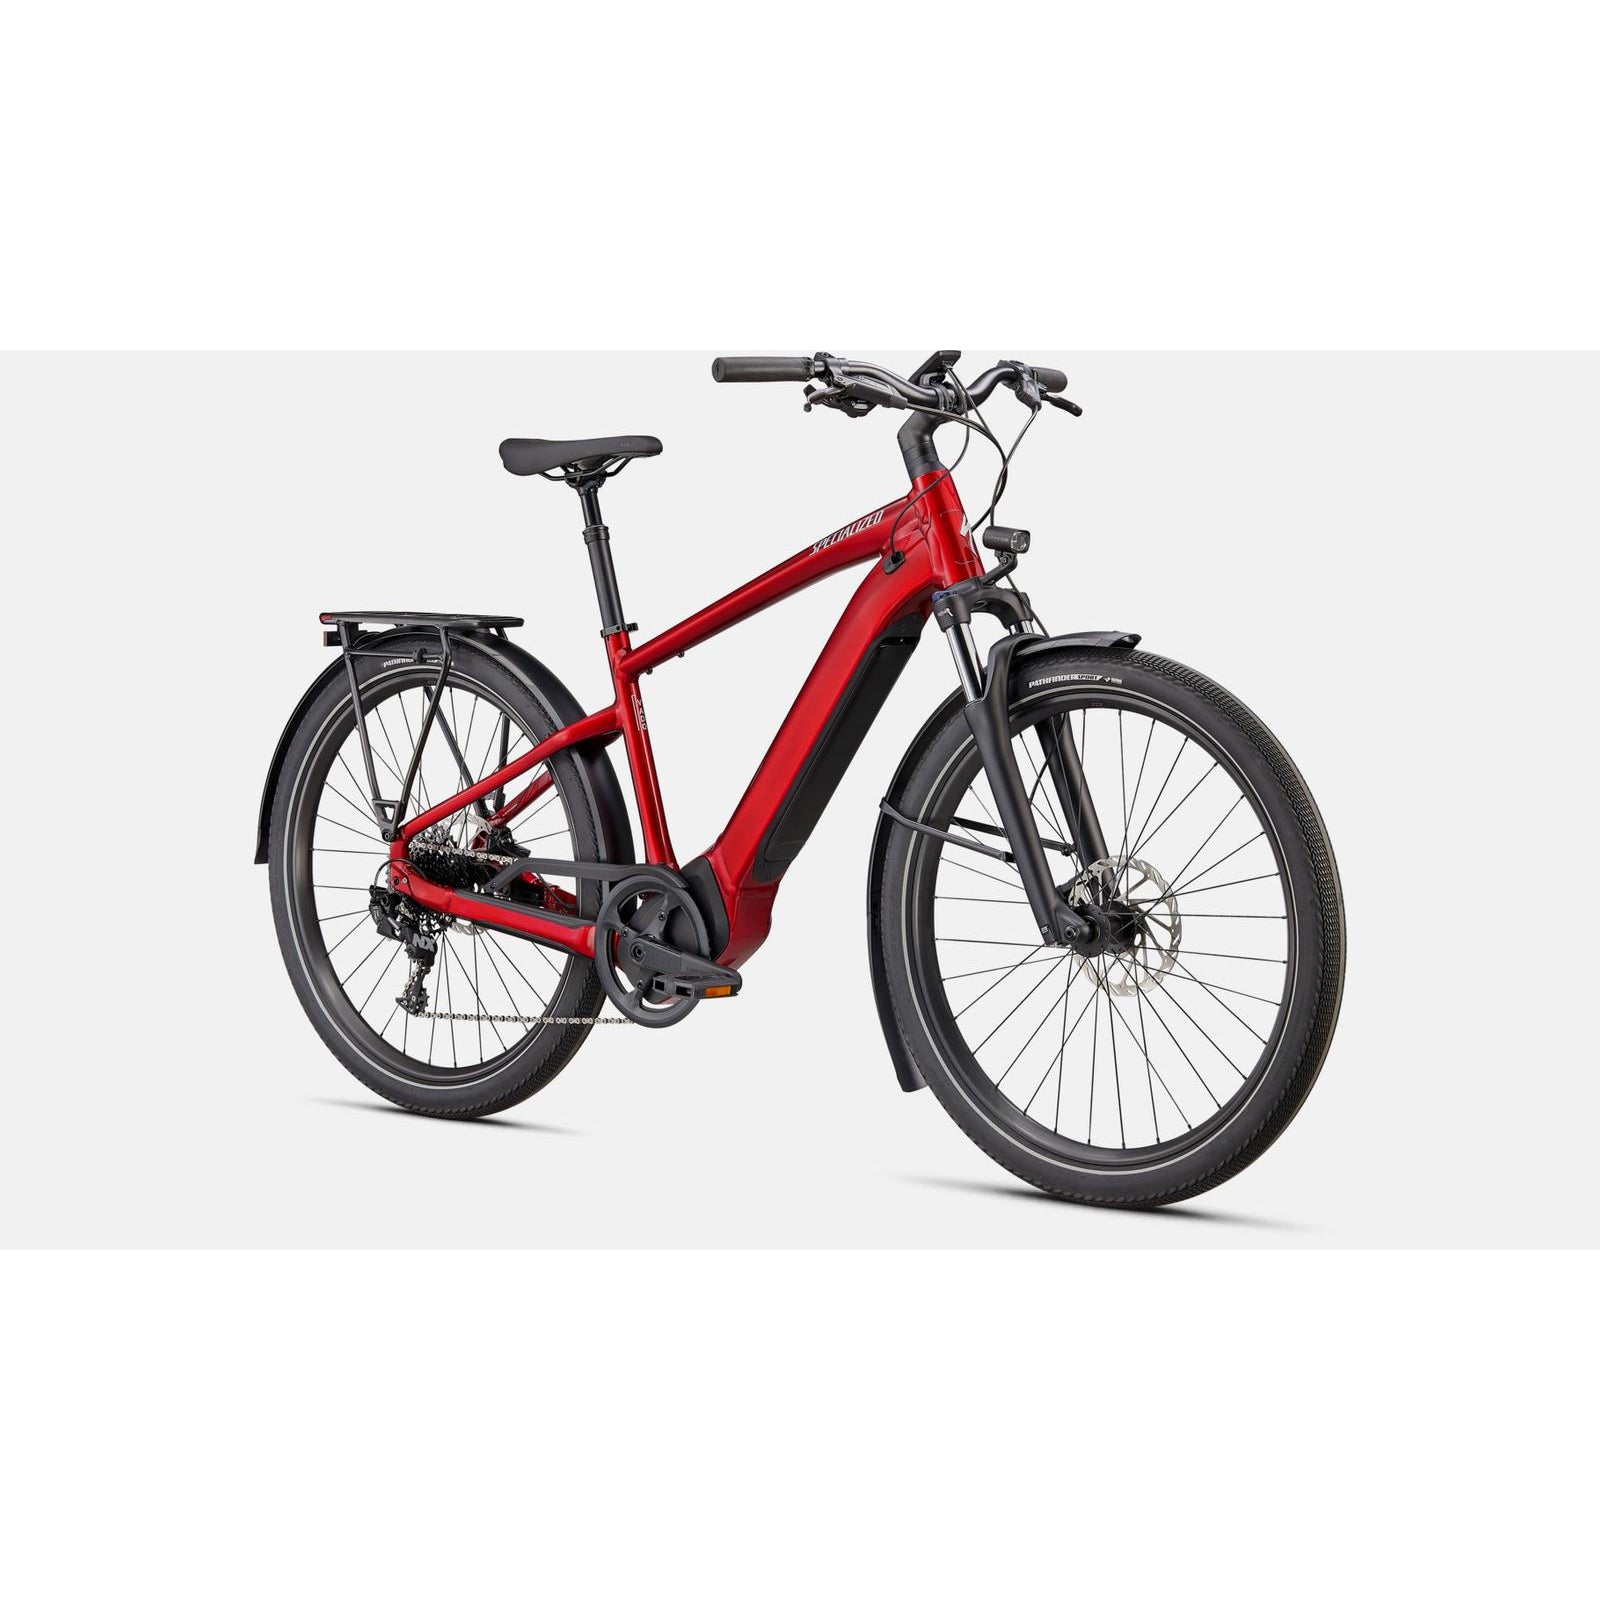 Specialized Turbo Vado 4.0 Active Electric Bike - Bikes - Bicycle Warehouse